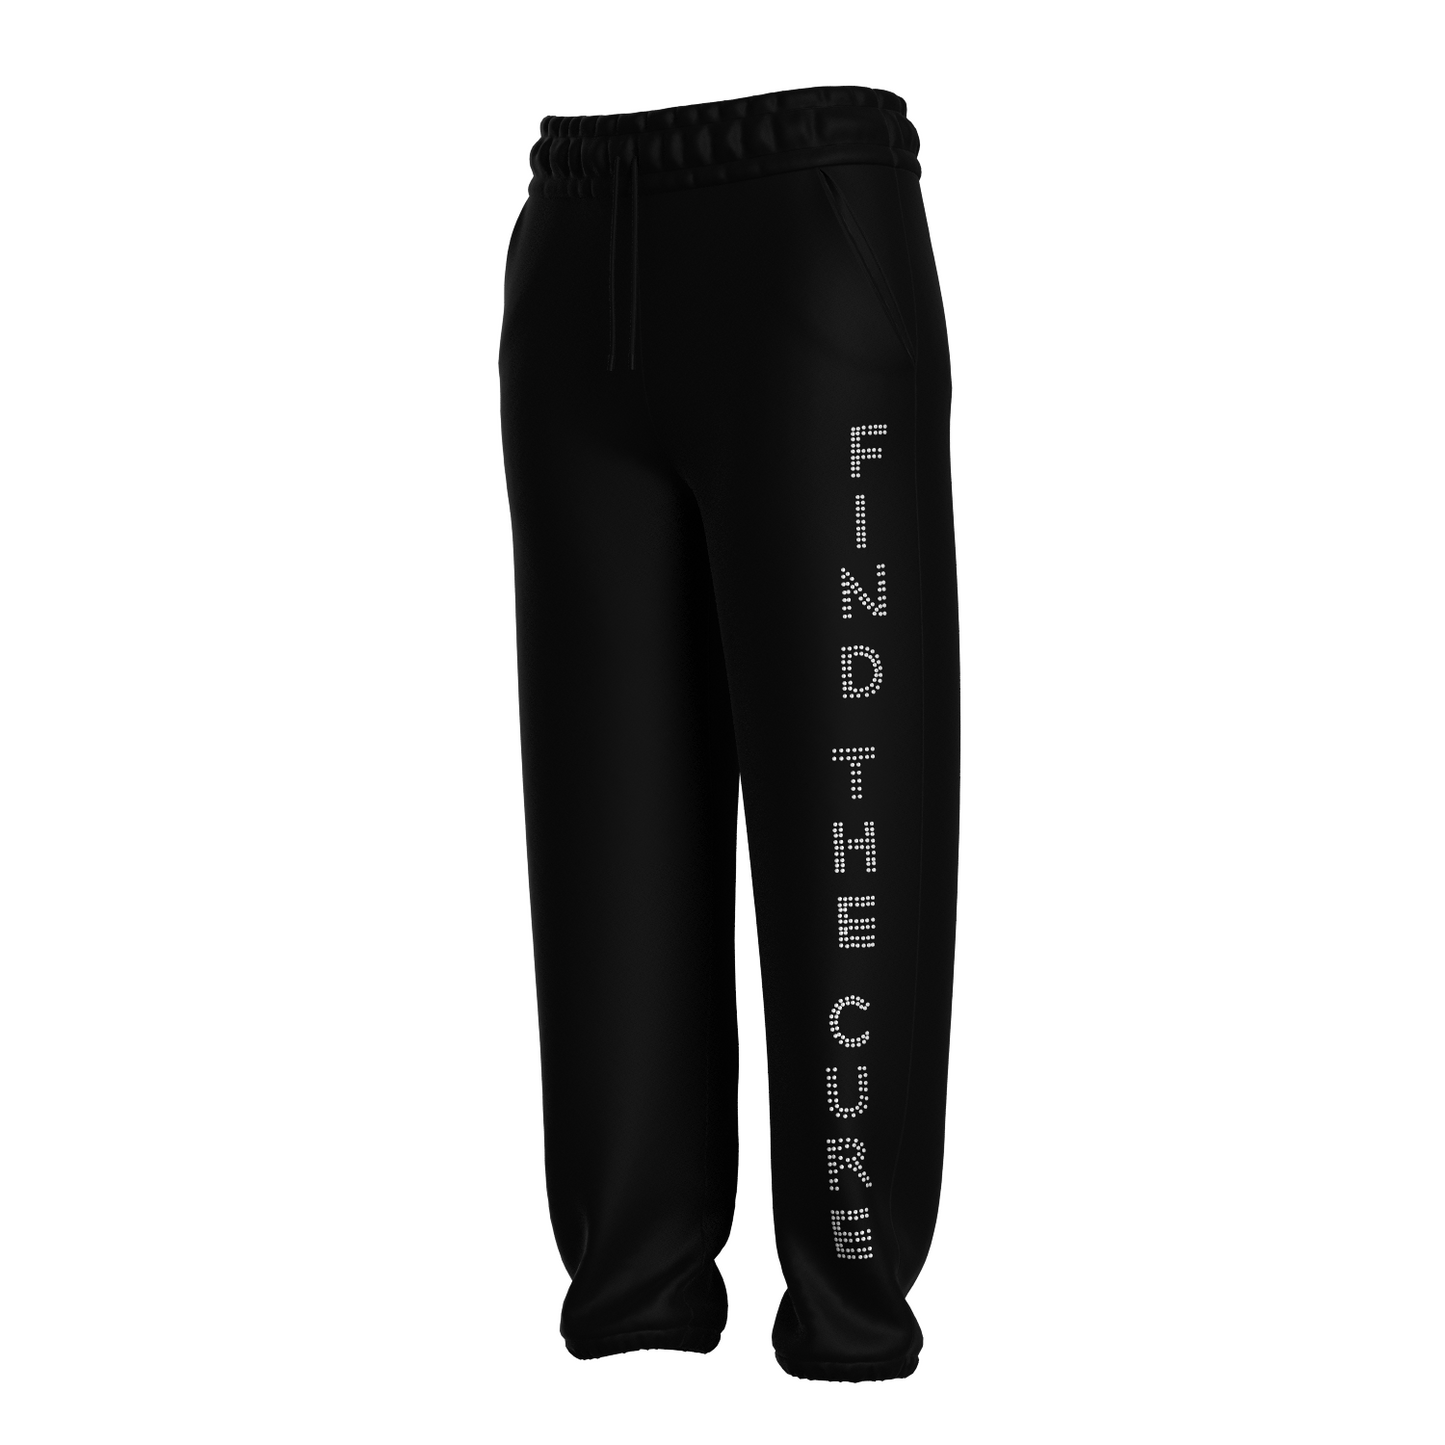 FIND THE CURE SWEATPANTS